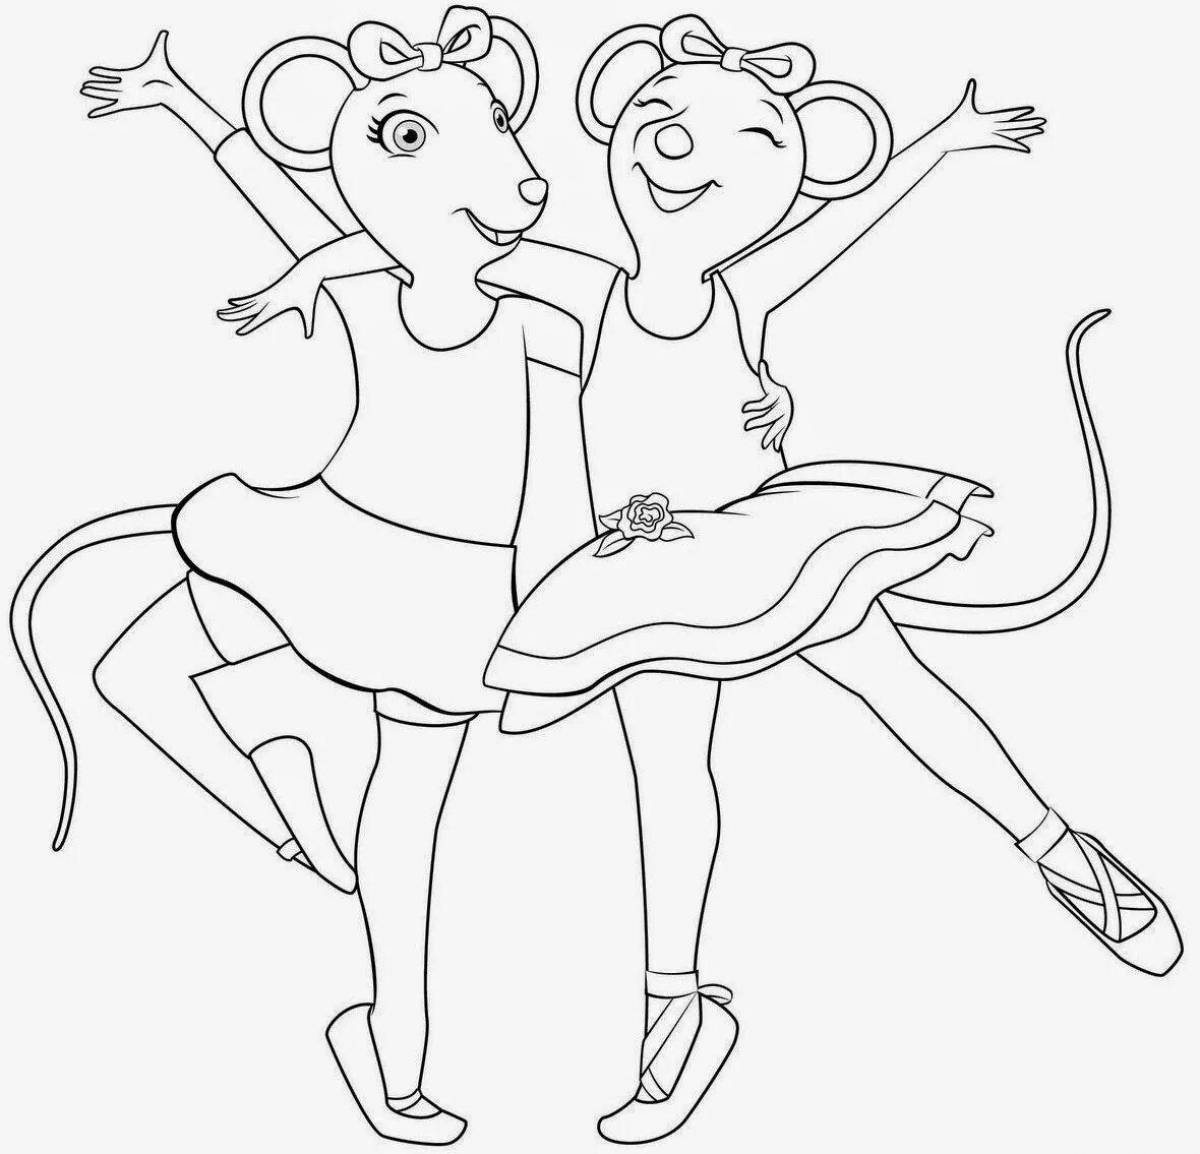 Amazing ballet coloring book for kids